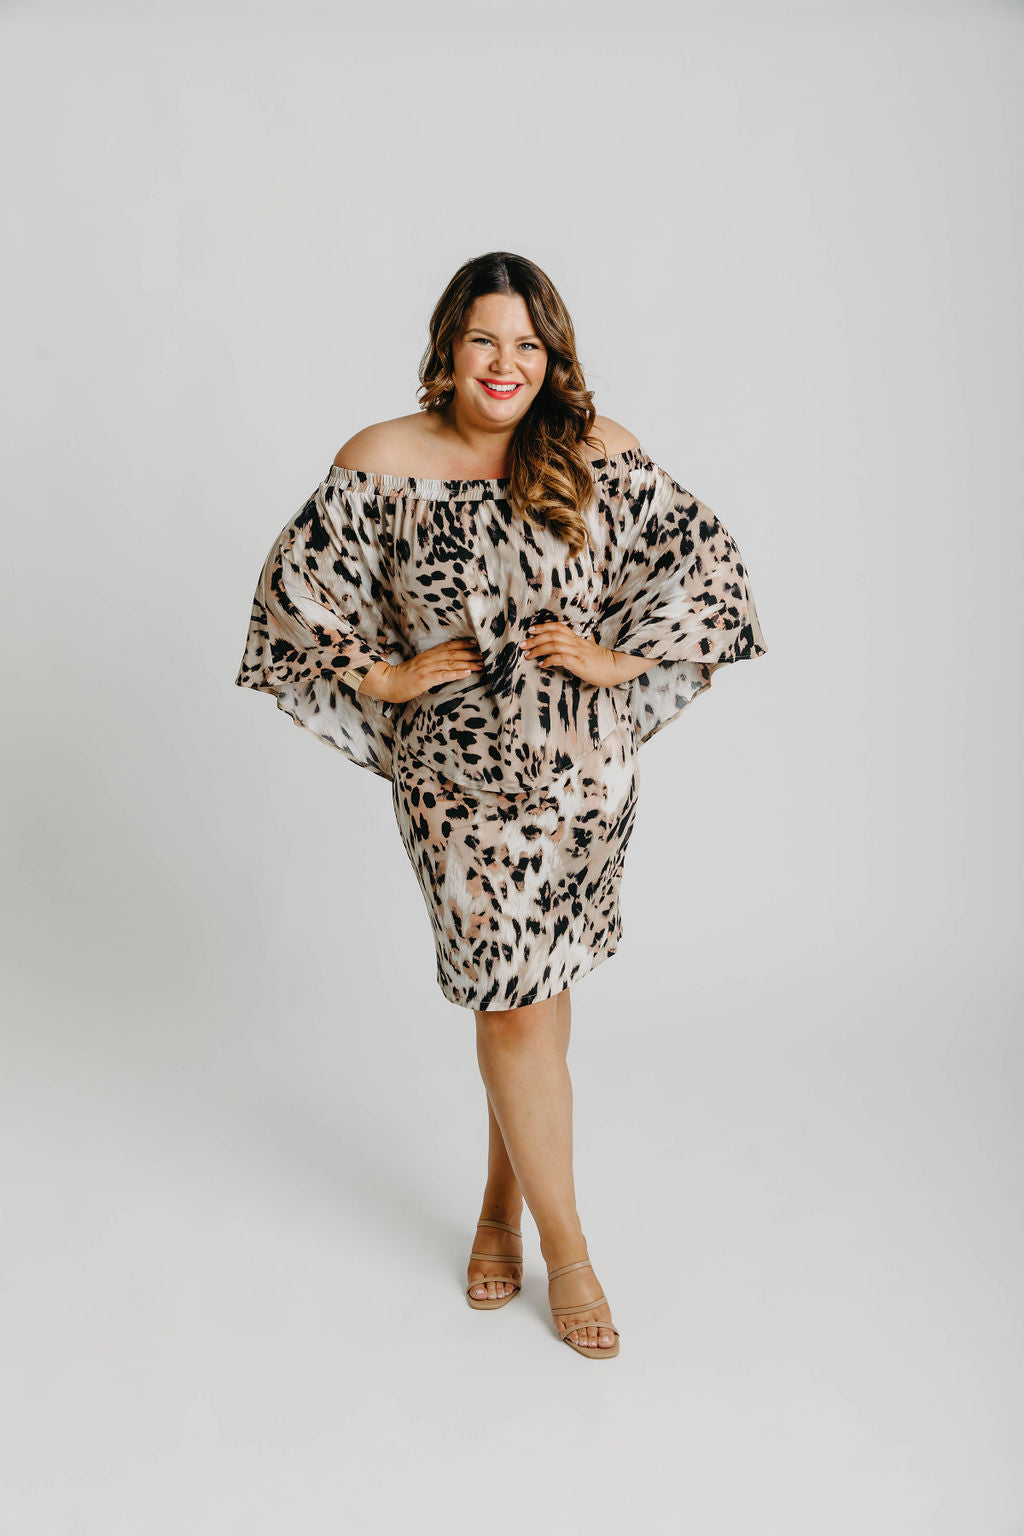 No Shade Here Dress Mid - Leopard